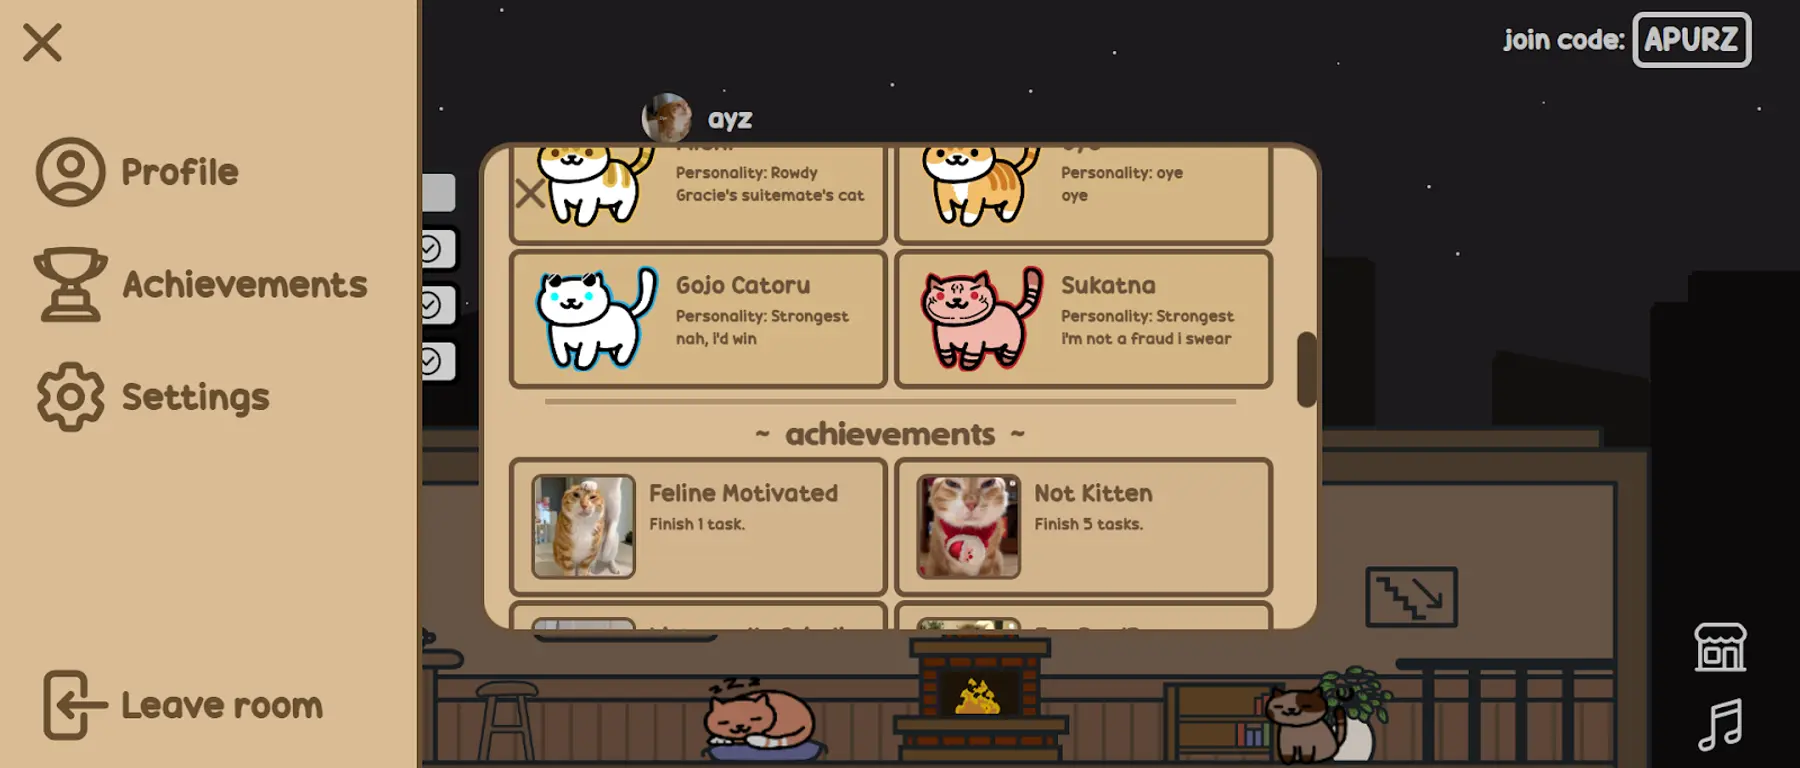 Completing tasks also unlocks achievements: more cats